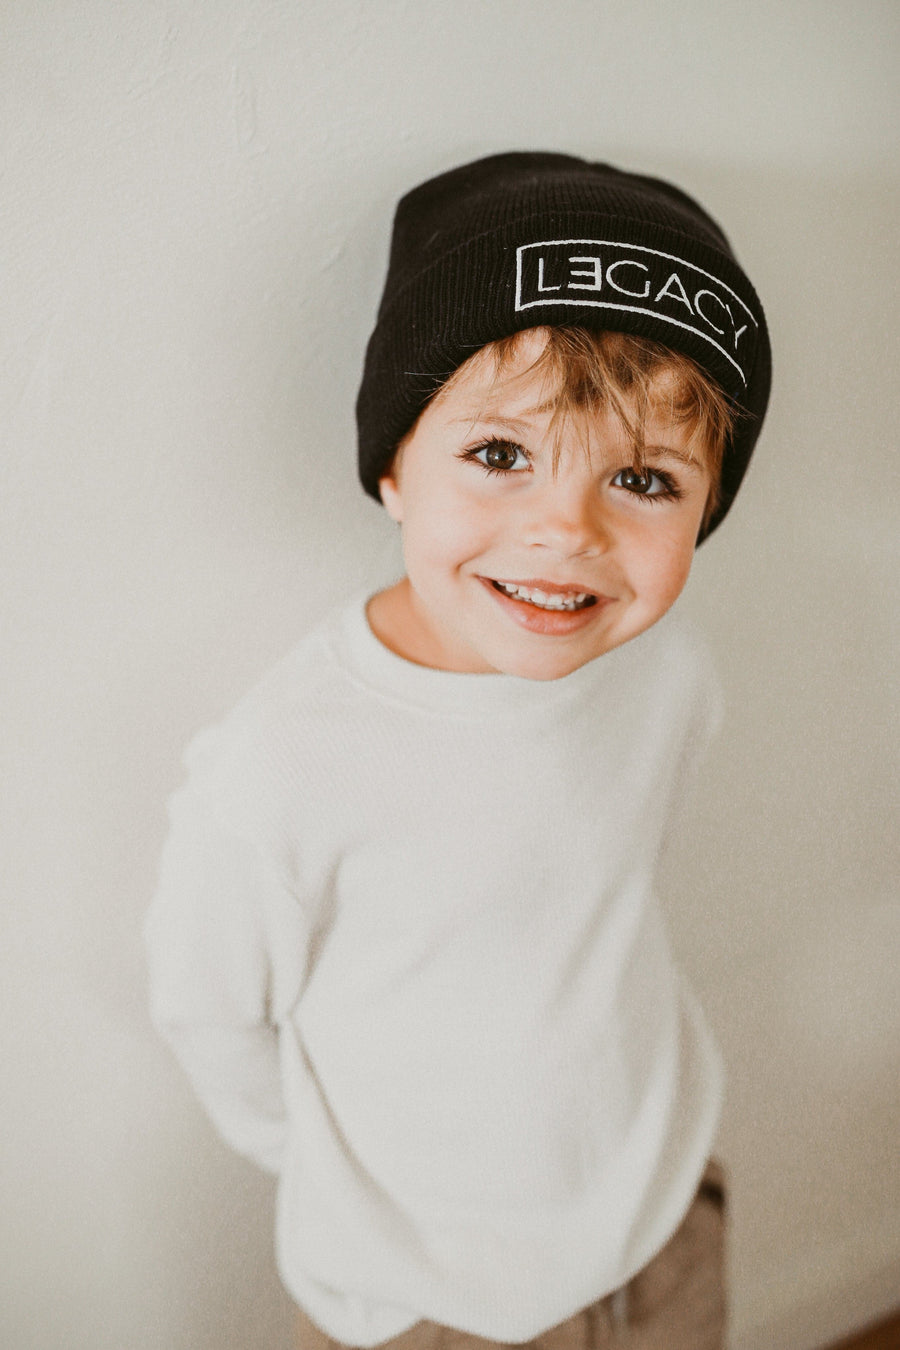 Coordinating Beanies Legend & Legacy, Embroidered Matching Family Beanies, Dad and Kid Beanie